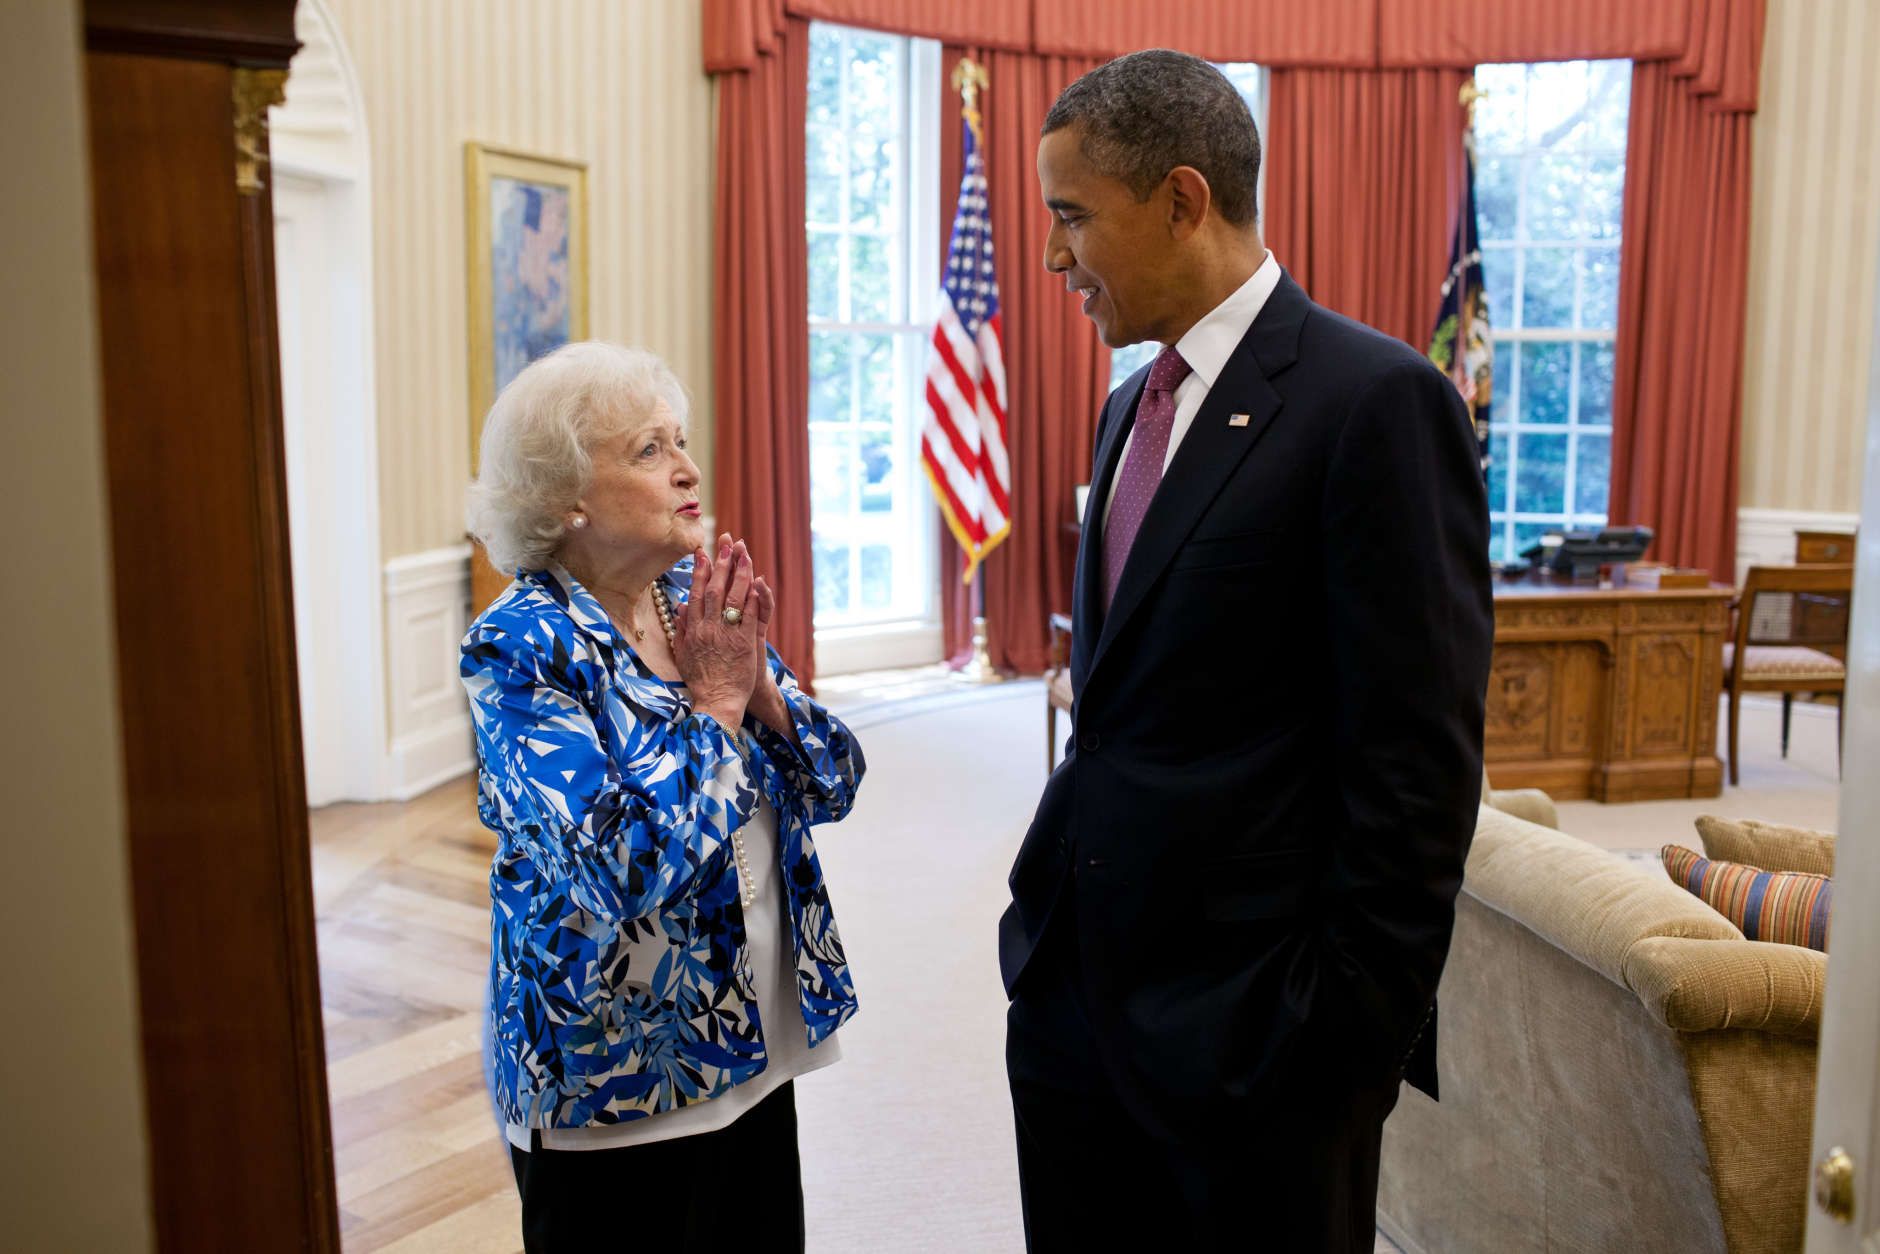 <p>President Barack Obama talks with Betty White in the Oval Office, June 11, 2012. (The White House/Pete Souza)</p>
